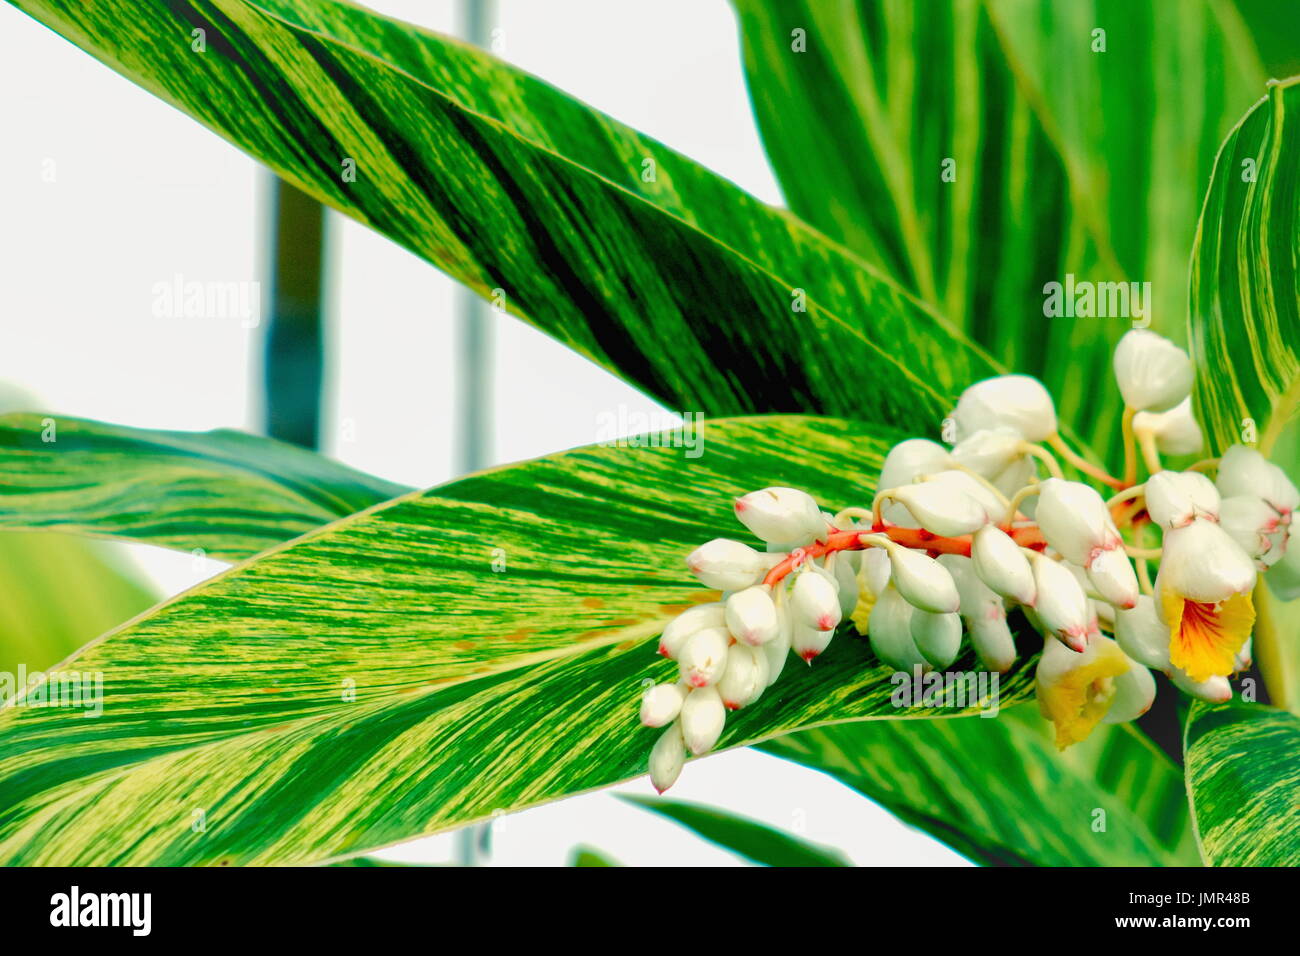 Close up image of Shell Ginger Plant showing leaves and flowers. Stock Photo